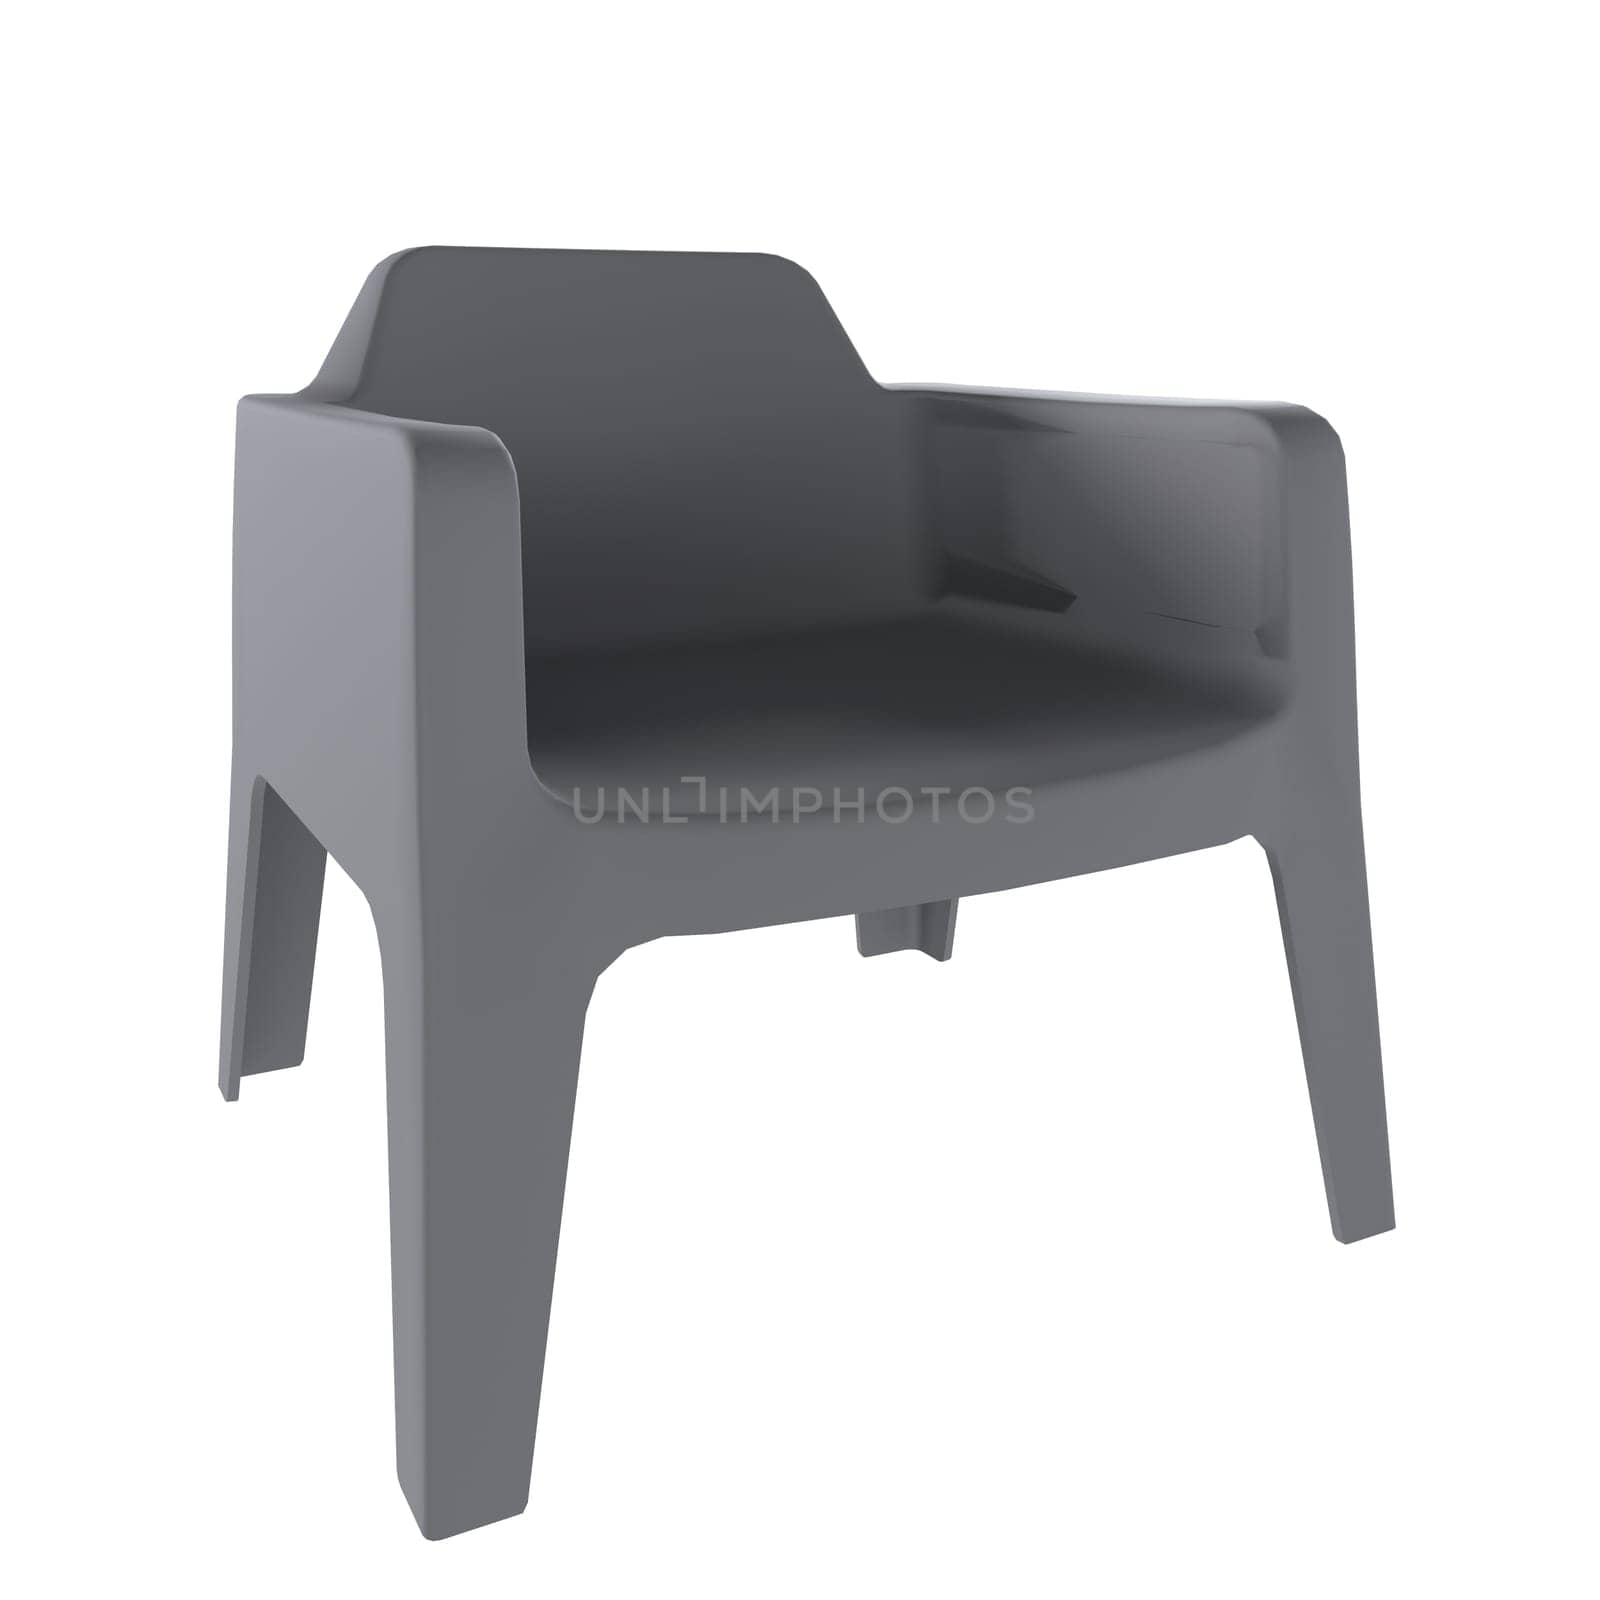 Mini Chair isolated on white background. High quality 3d illustration